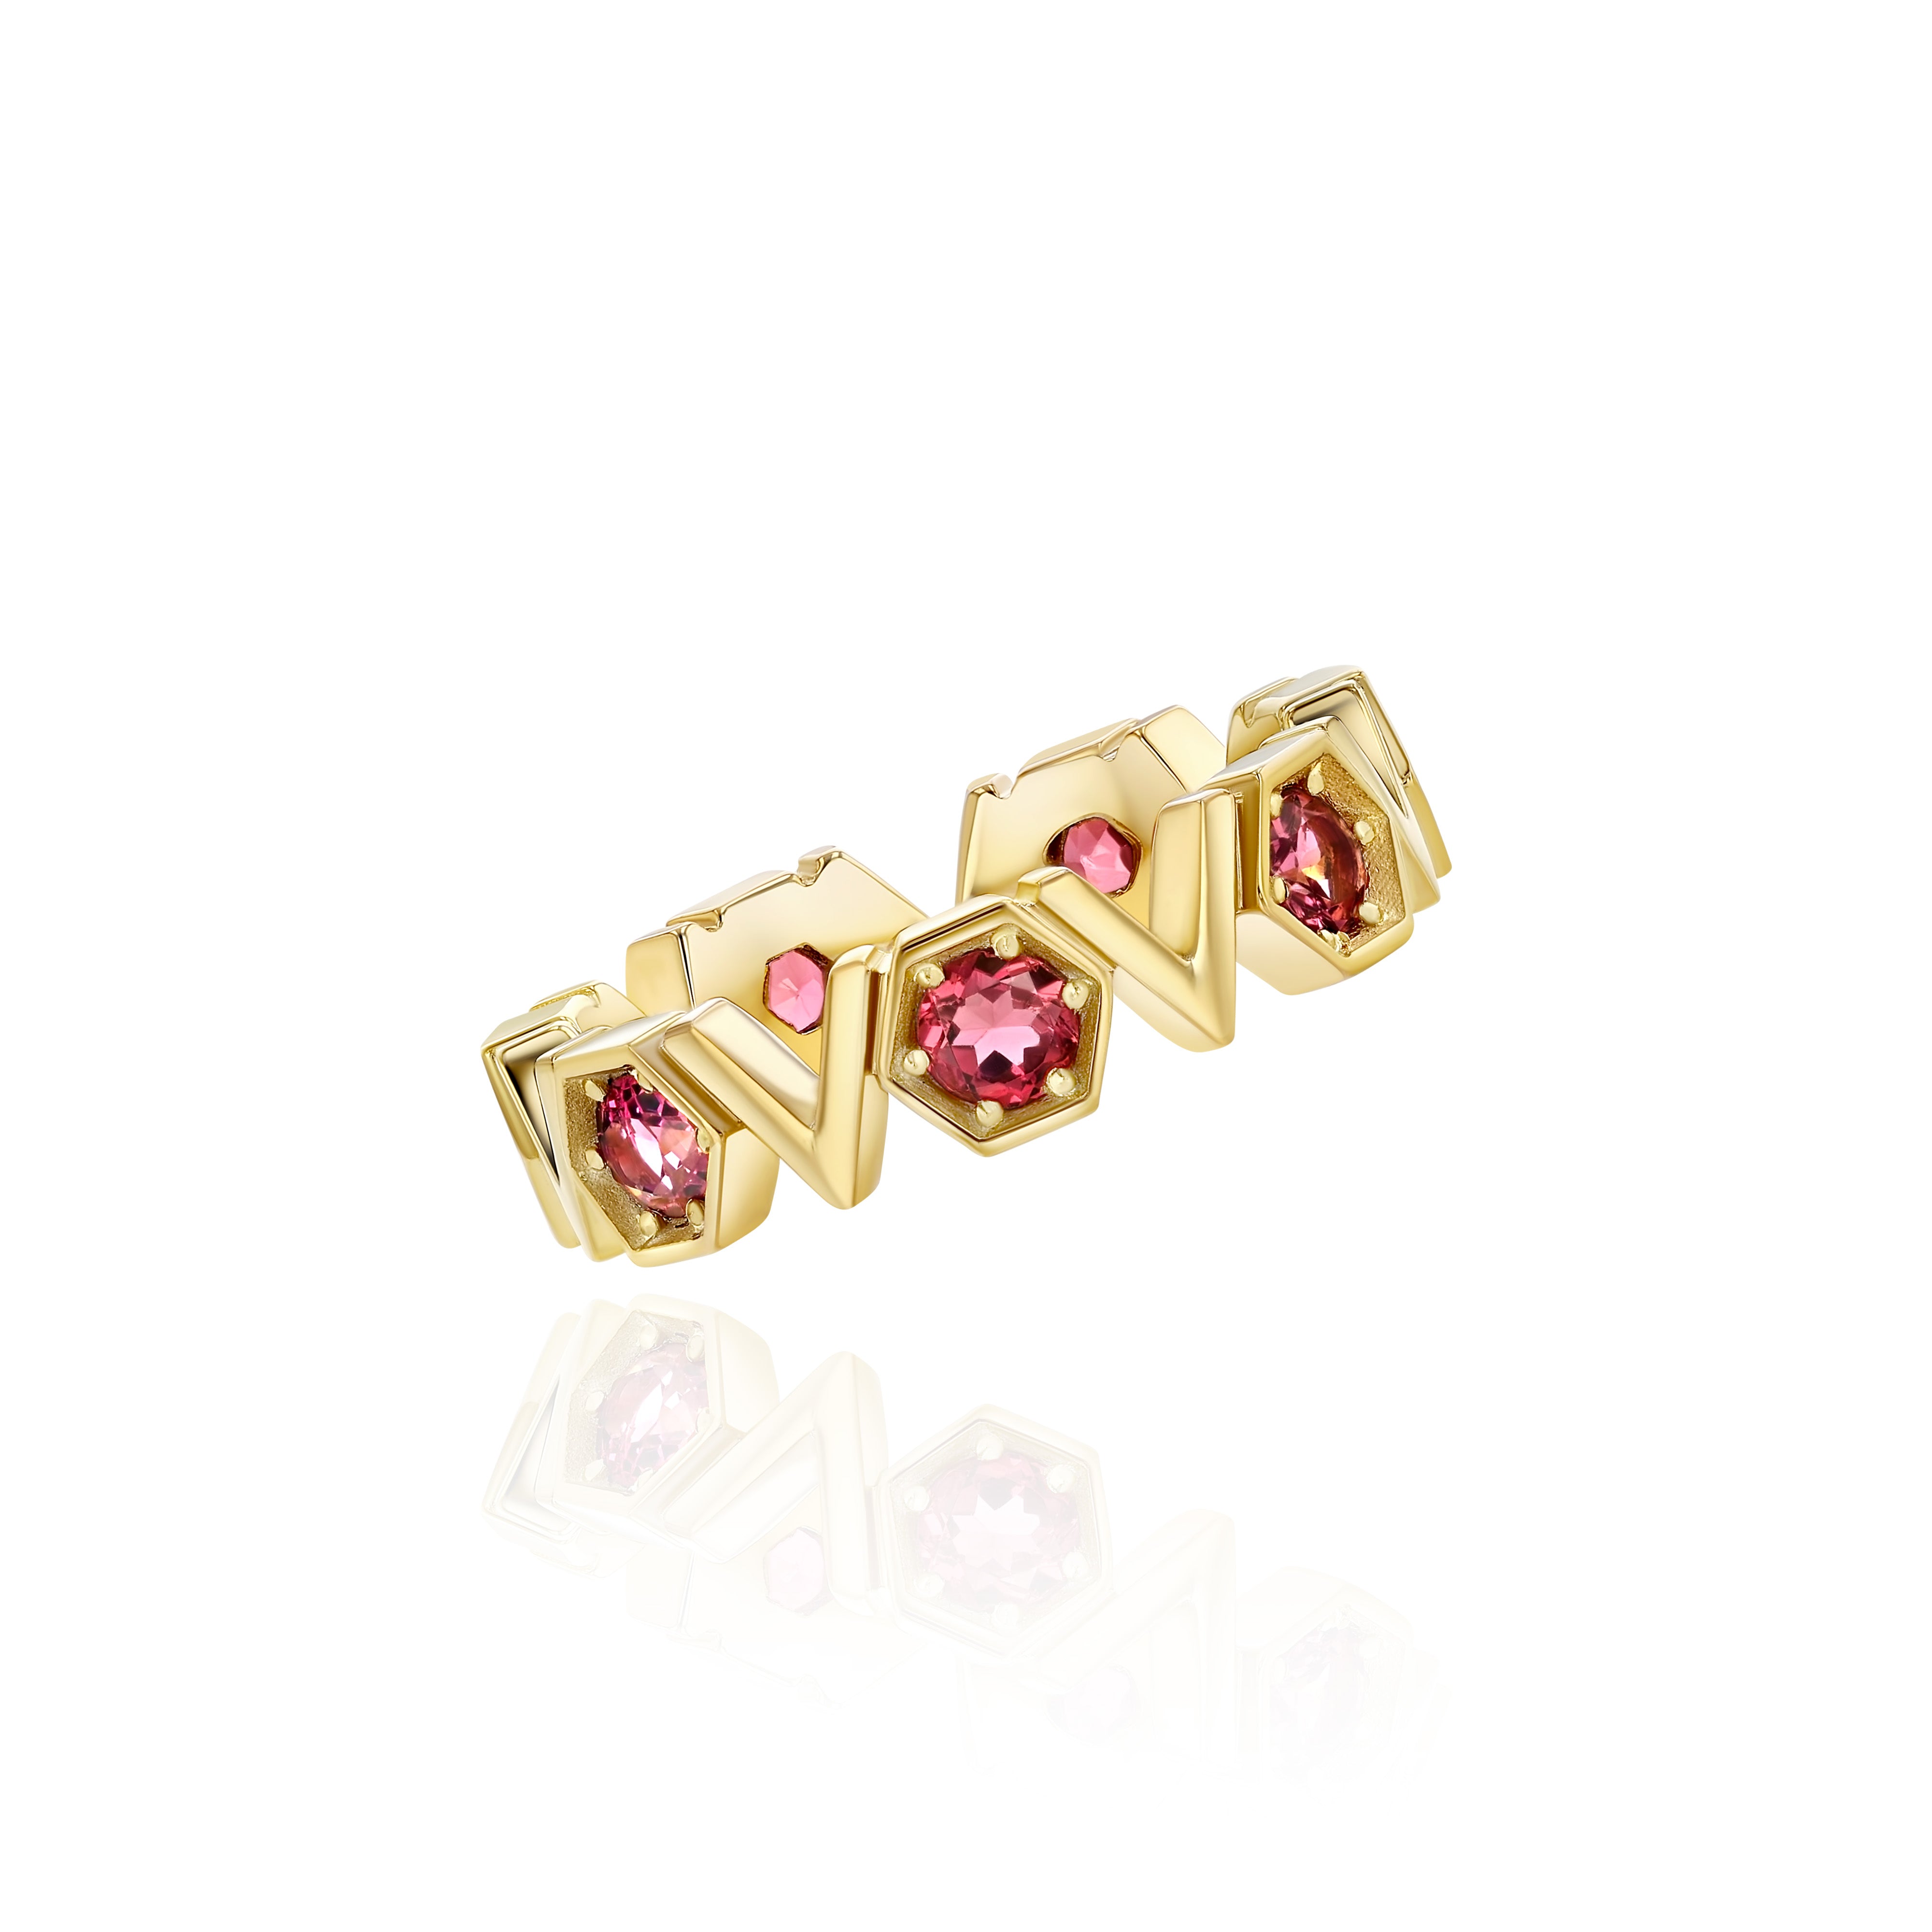 Gold Plated Silver Band with repeating Pink Tourmaline hexagons and V shapes, Medium